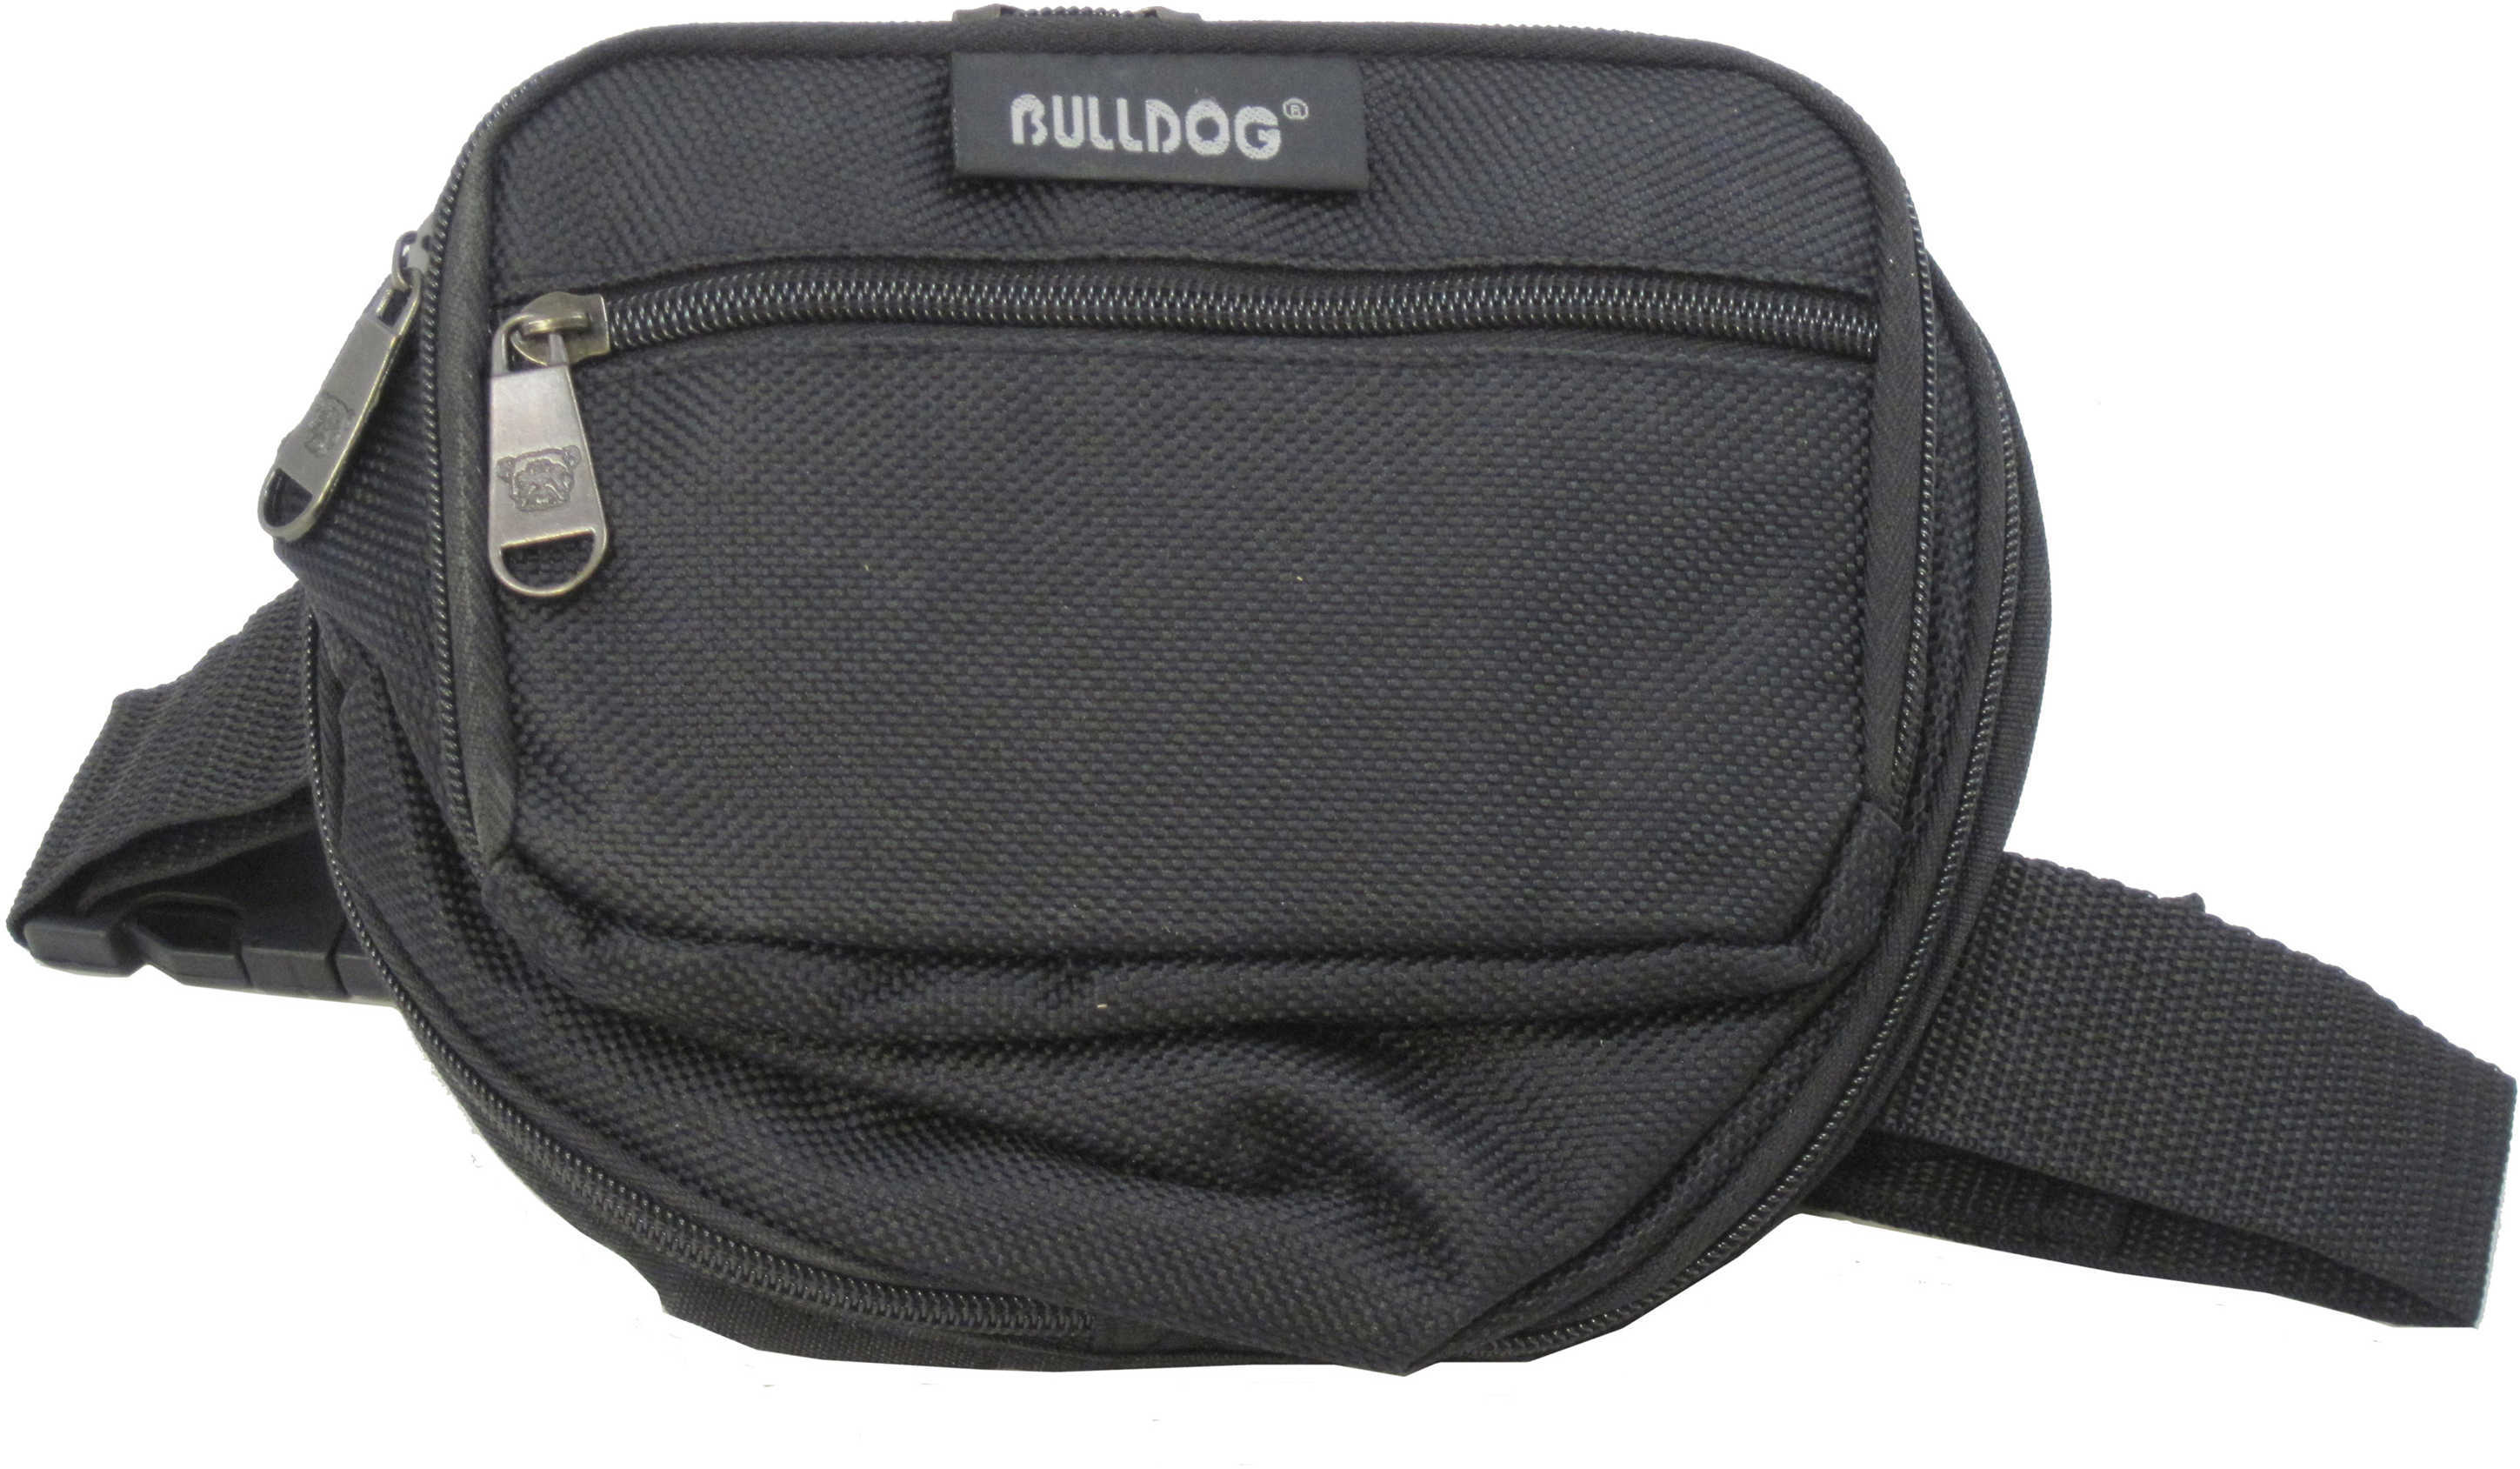 Bulldog Cases Small Black Water Resistant Nylon Fanny Pack Md: BD850